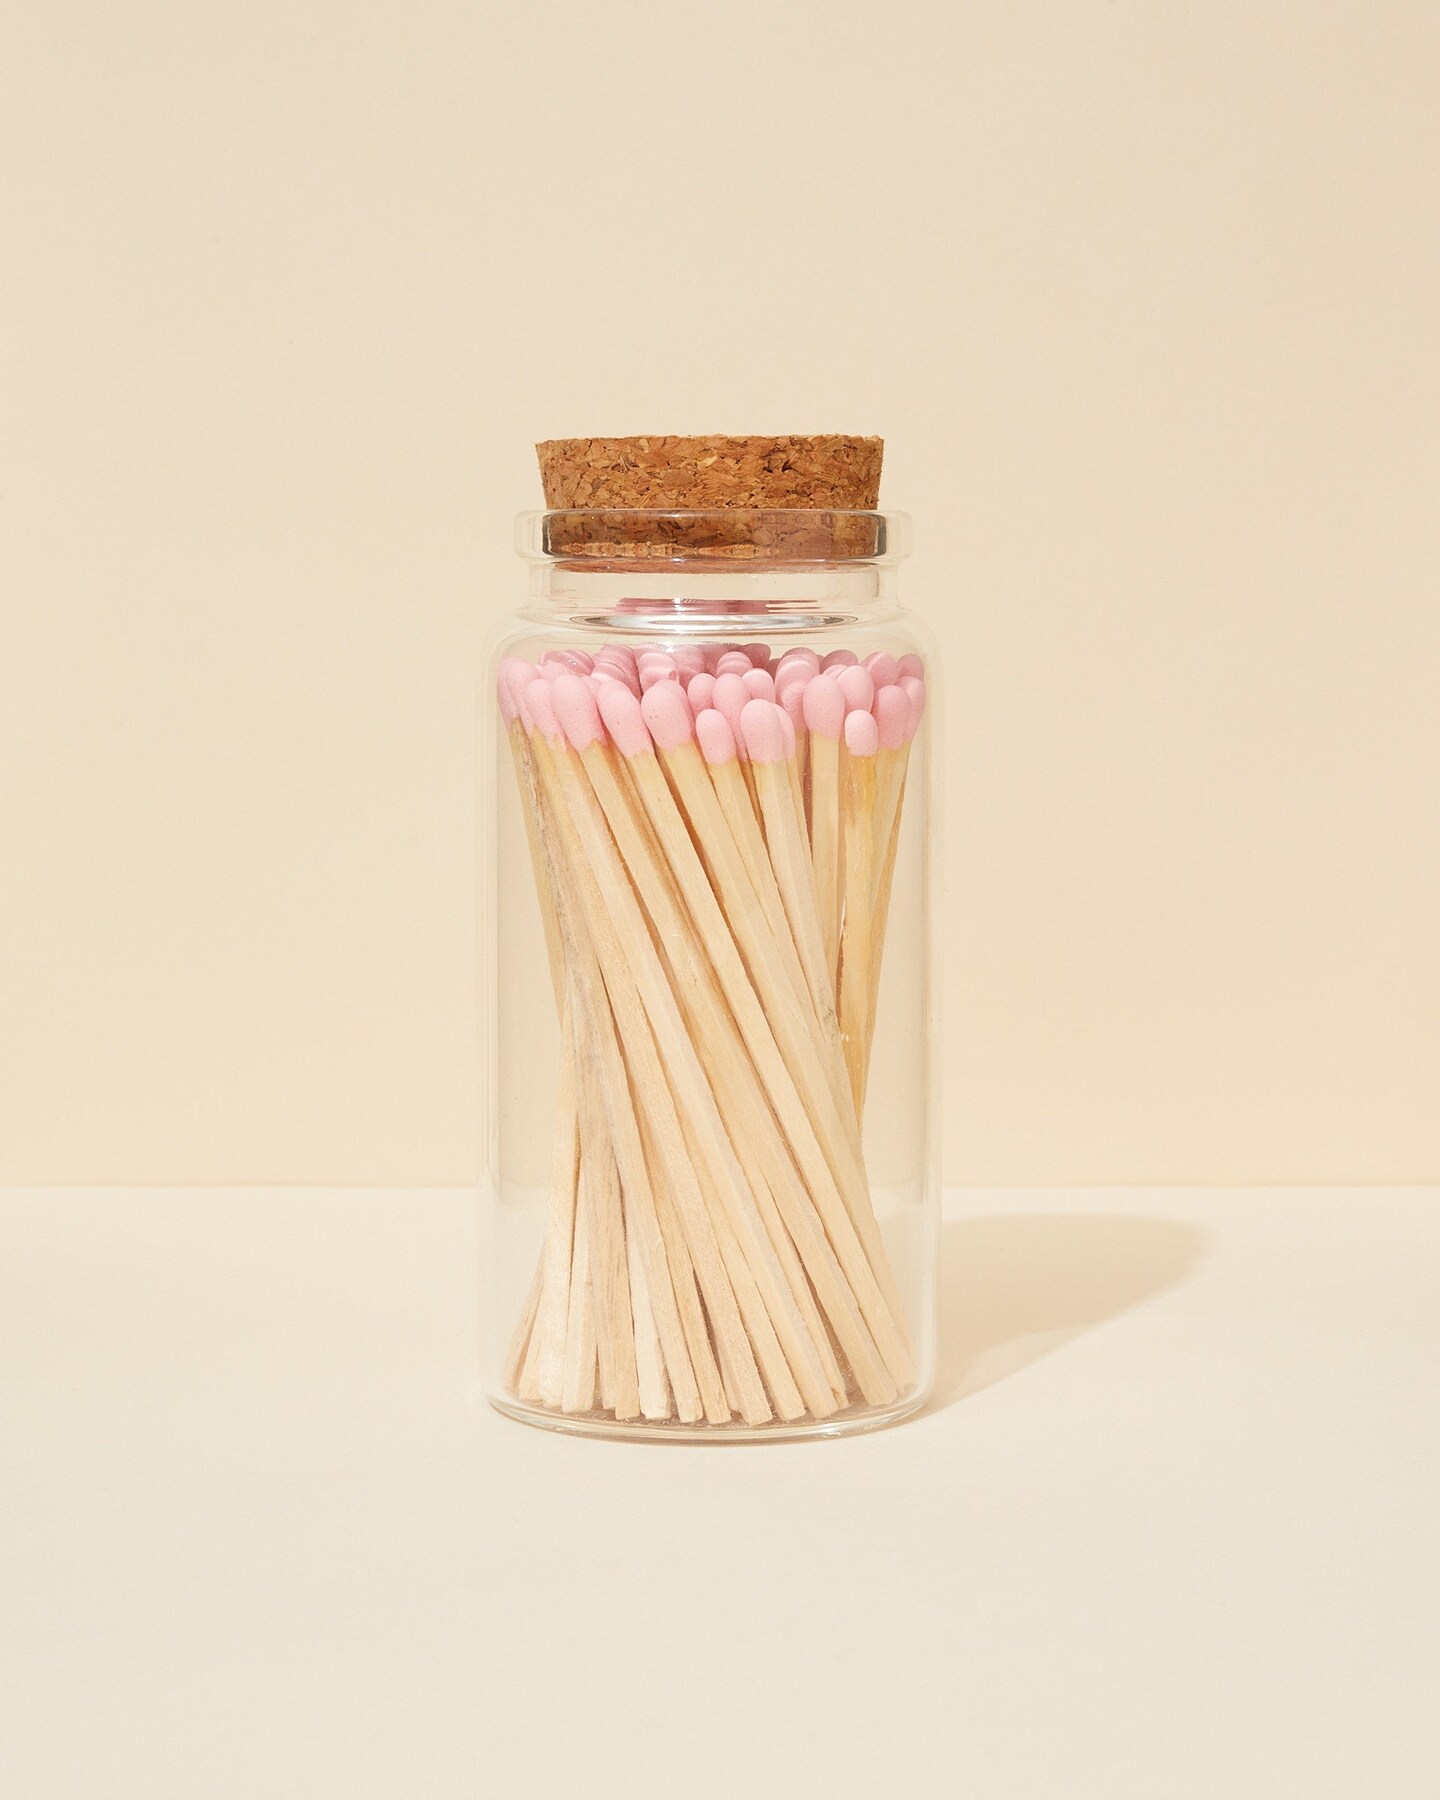 Pink Tip Wooden Matches With Jar, 4 Inches